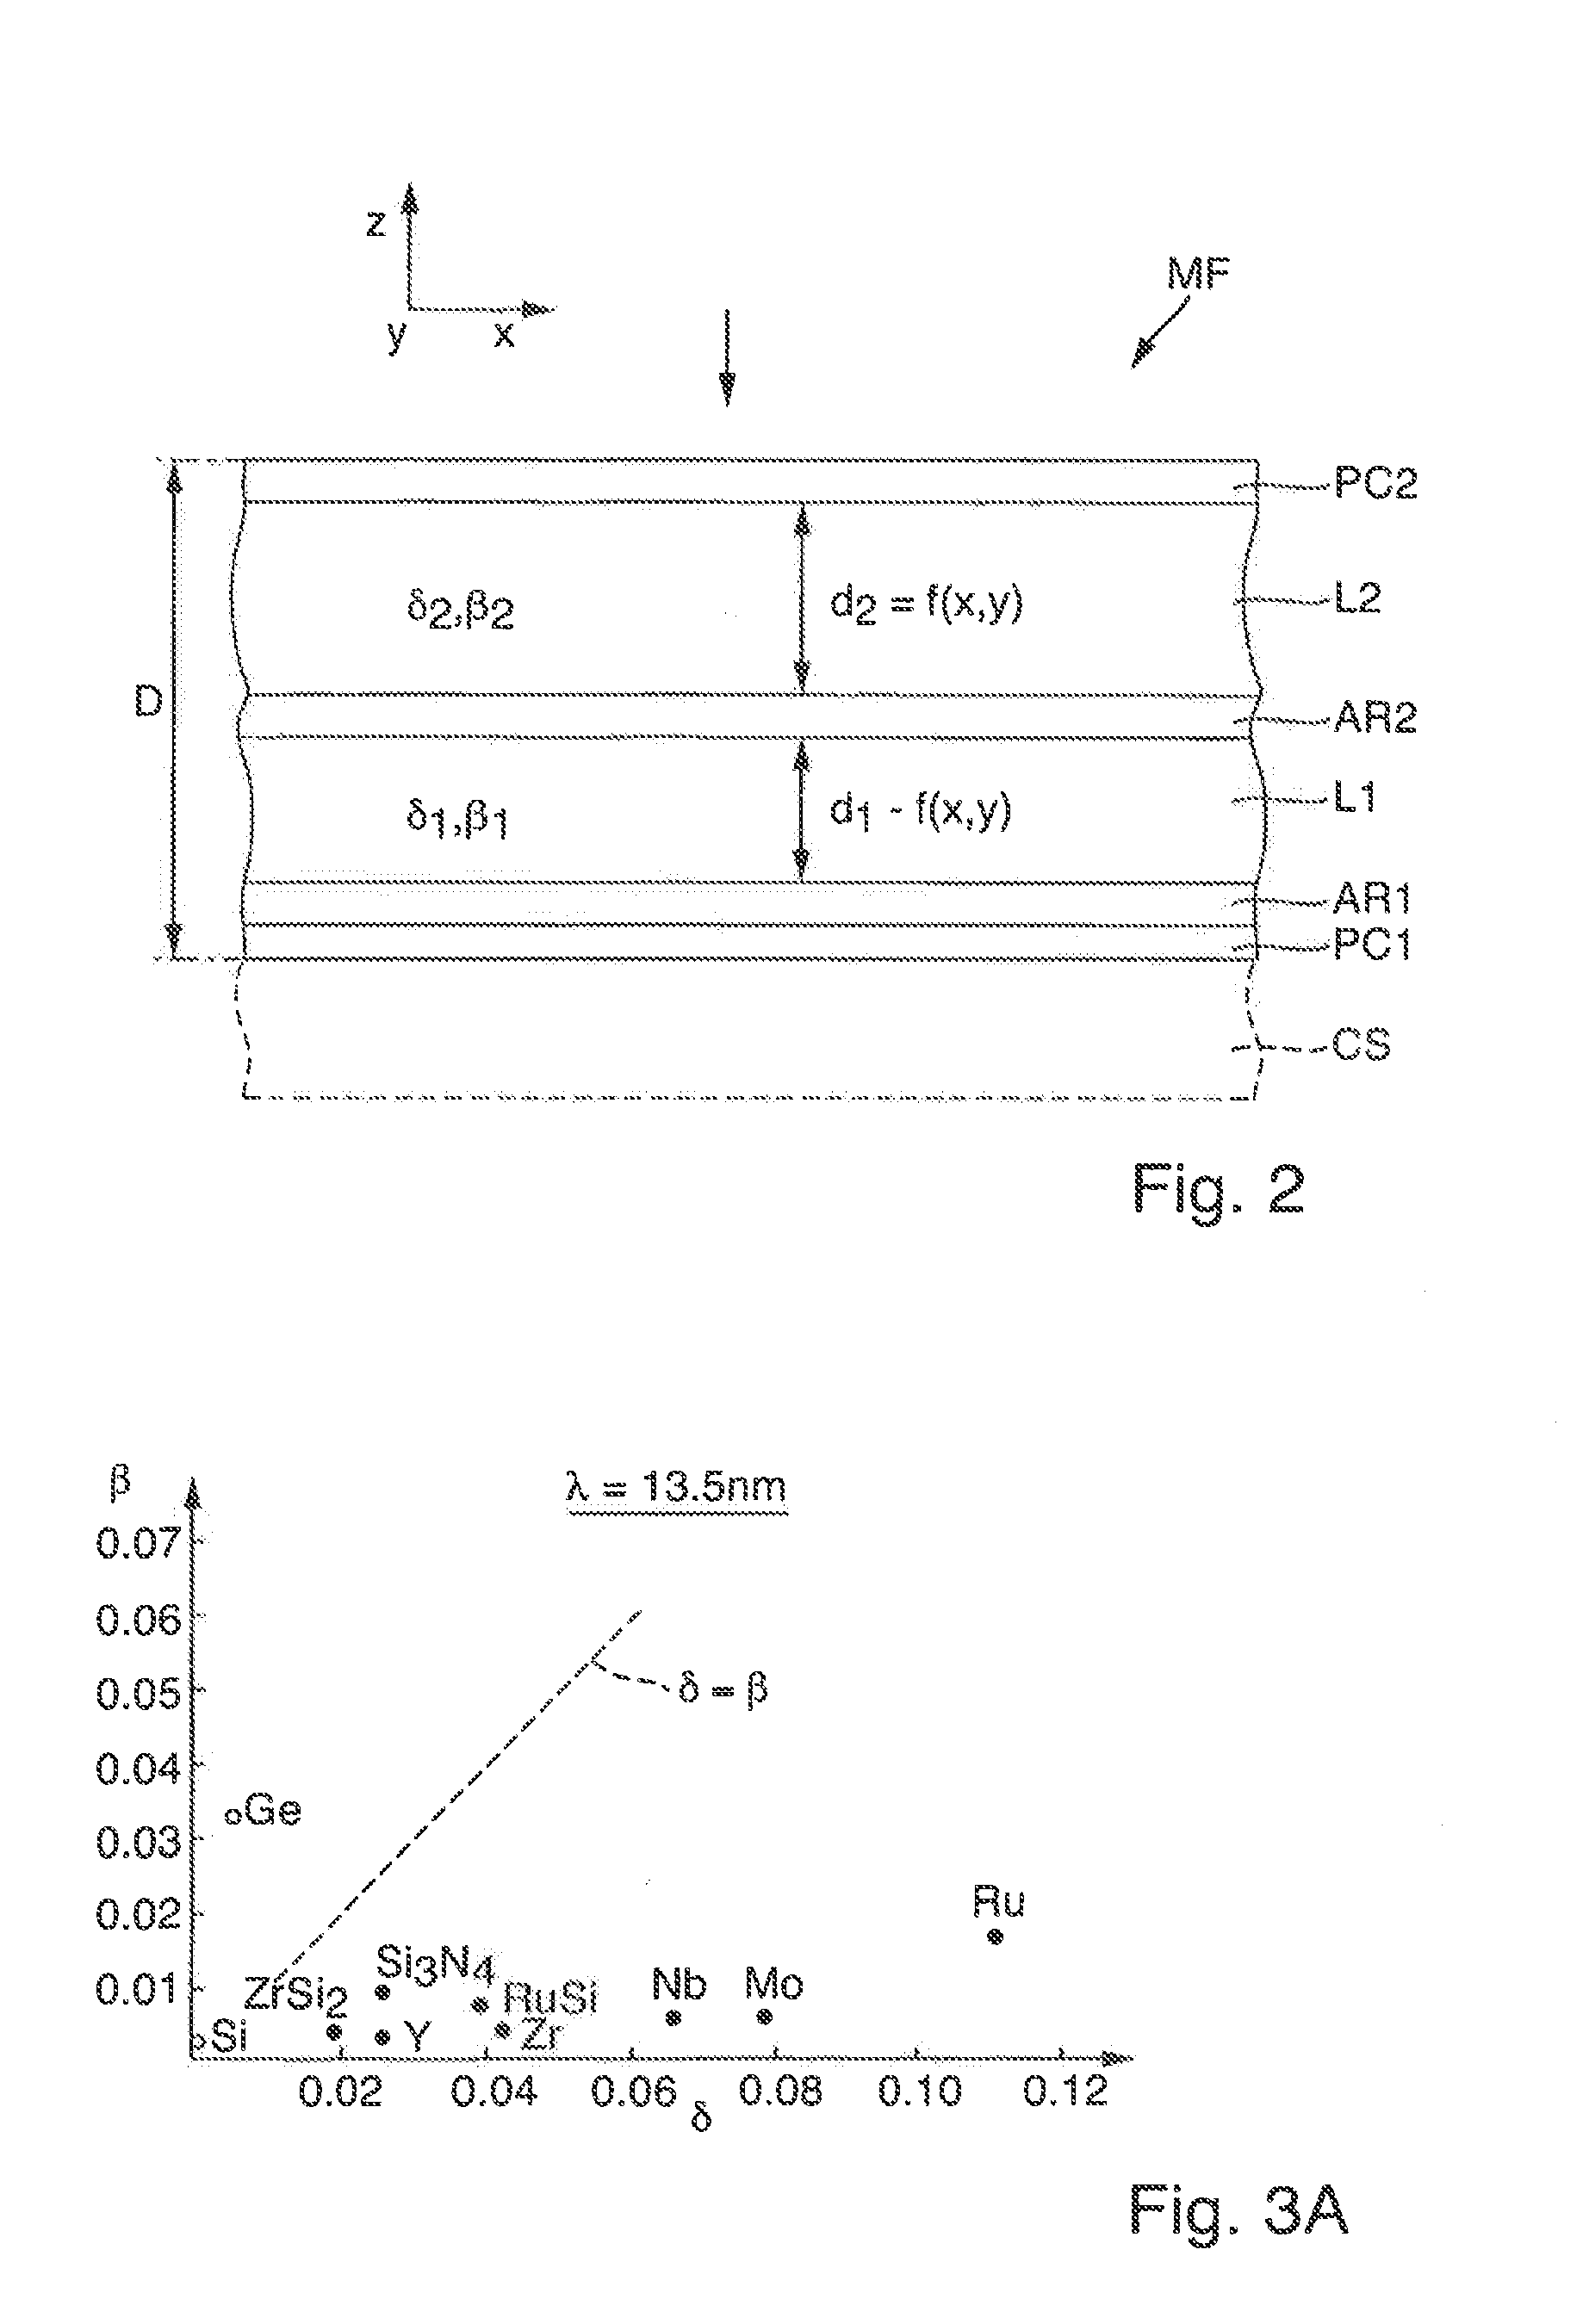 Projection Lens for EUV Microlithography, Film Element and Method for Producing a Projection Lens Comprising a Film Element